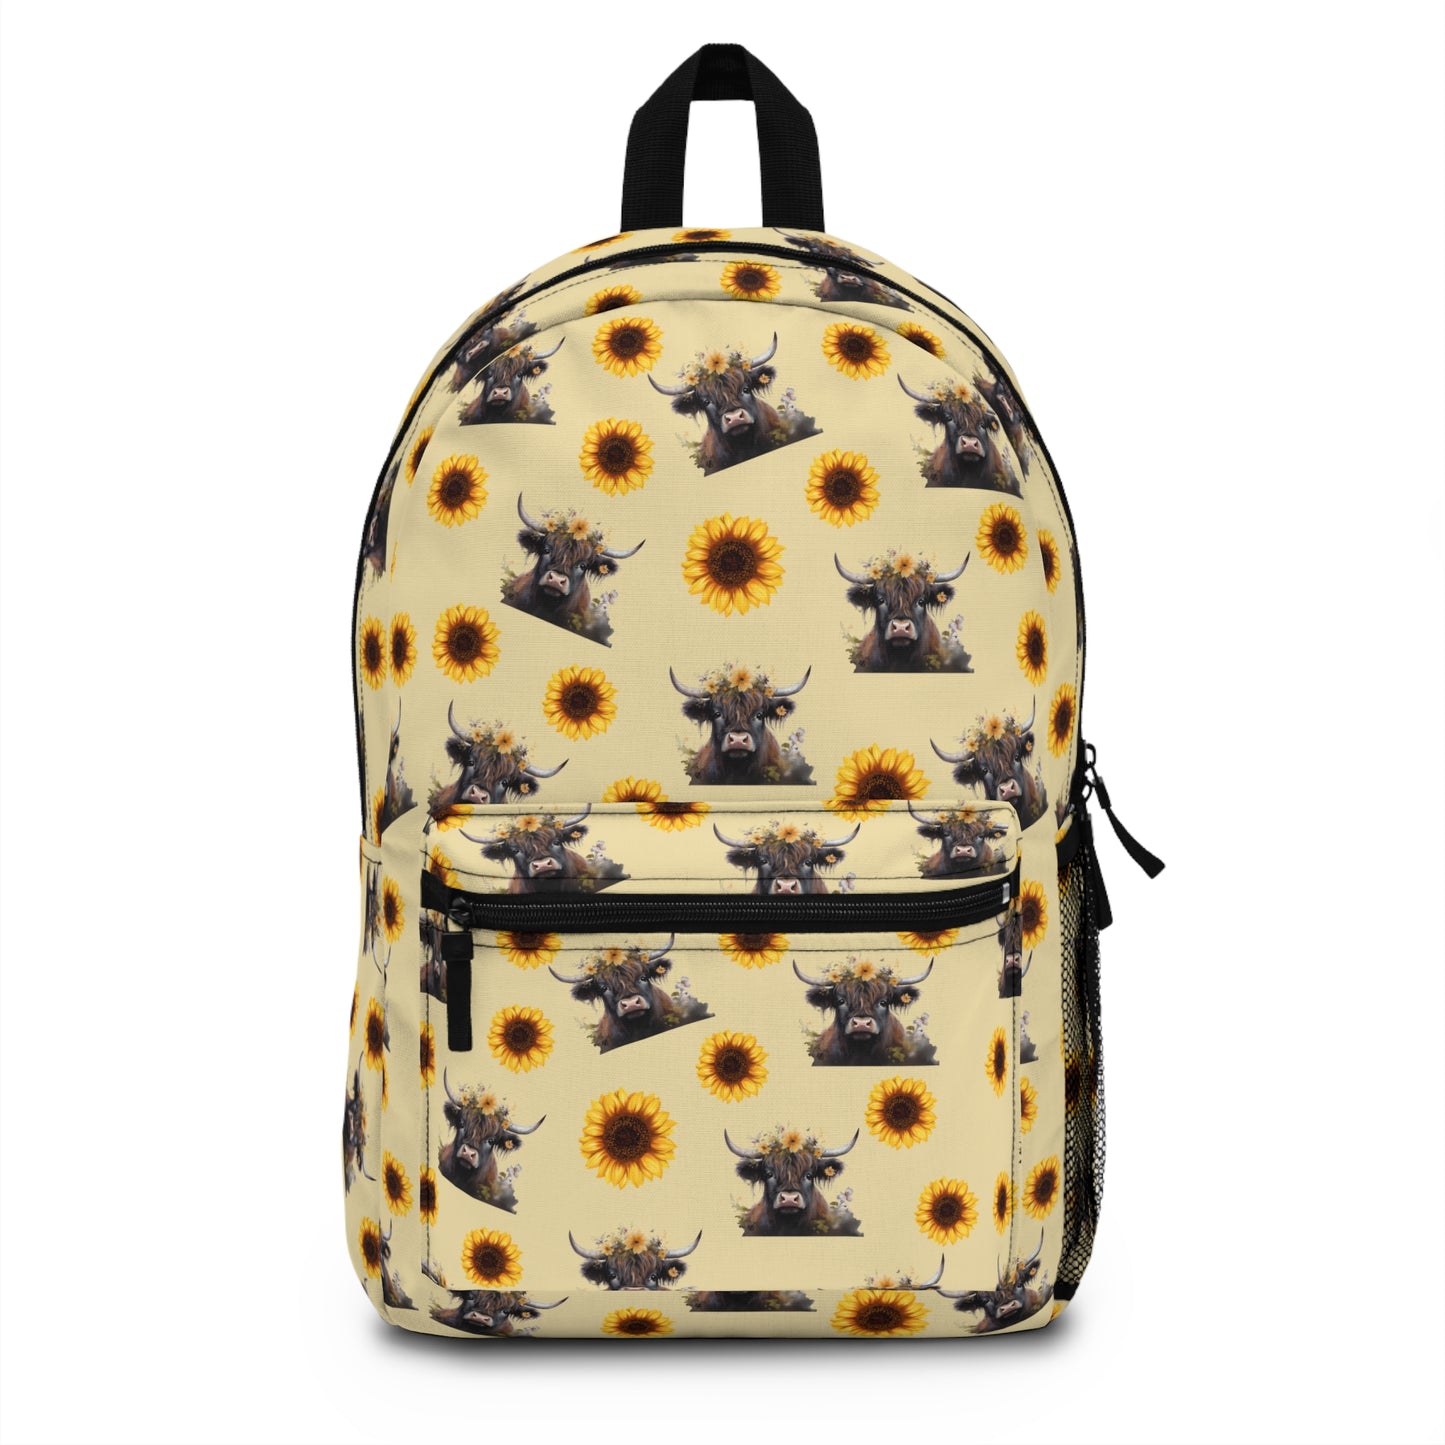 highland cow and sunflower backpack for girls back to school